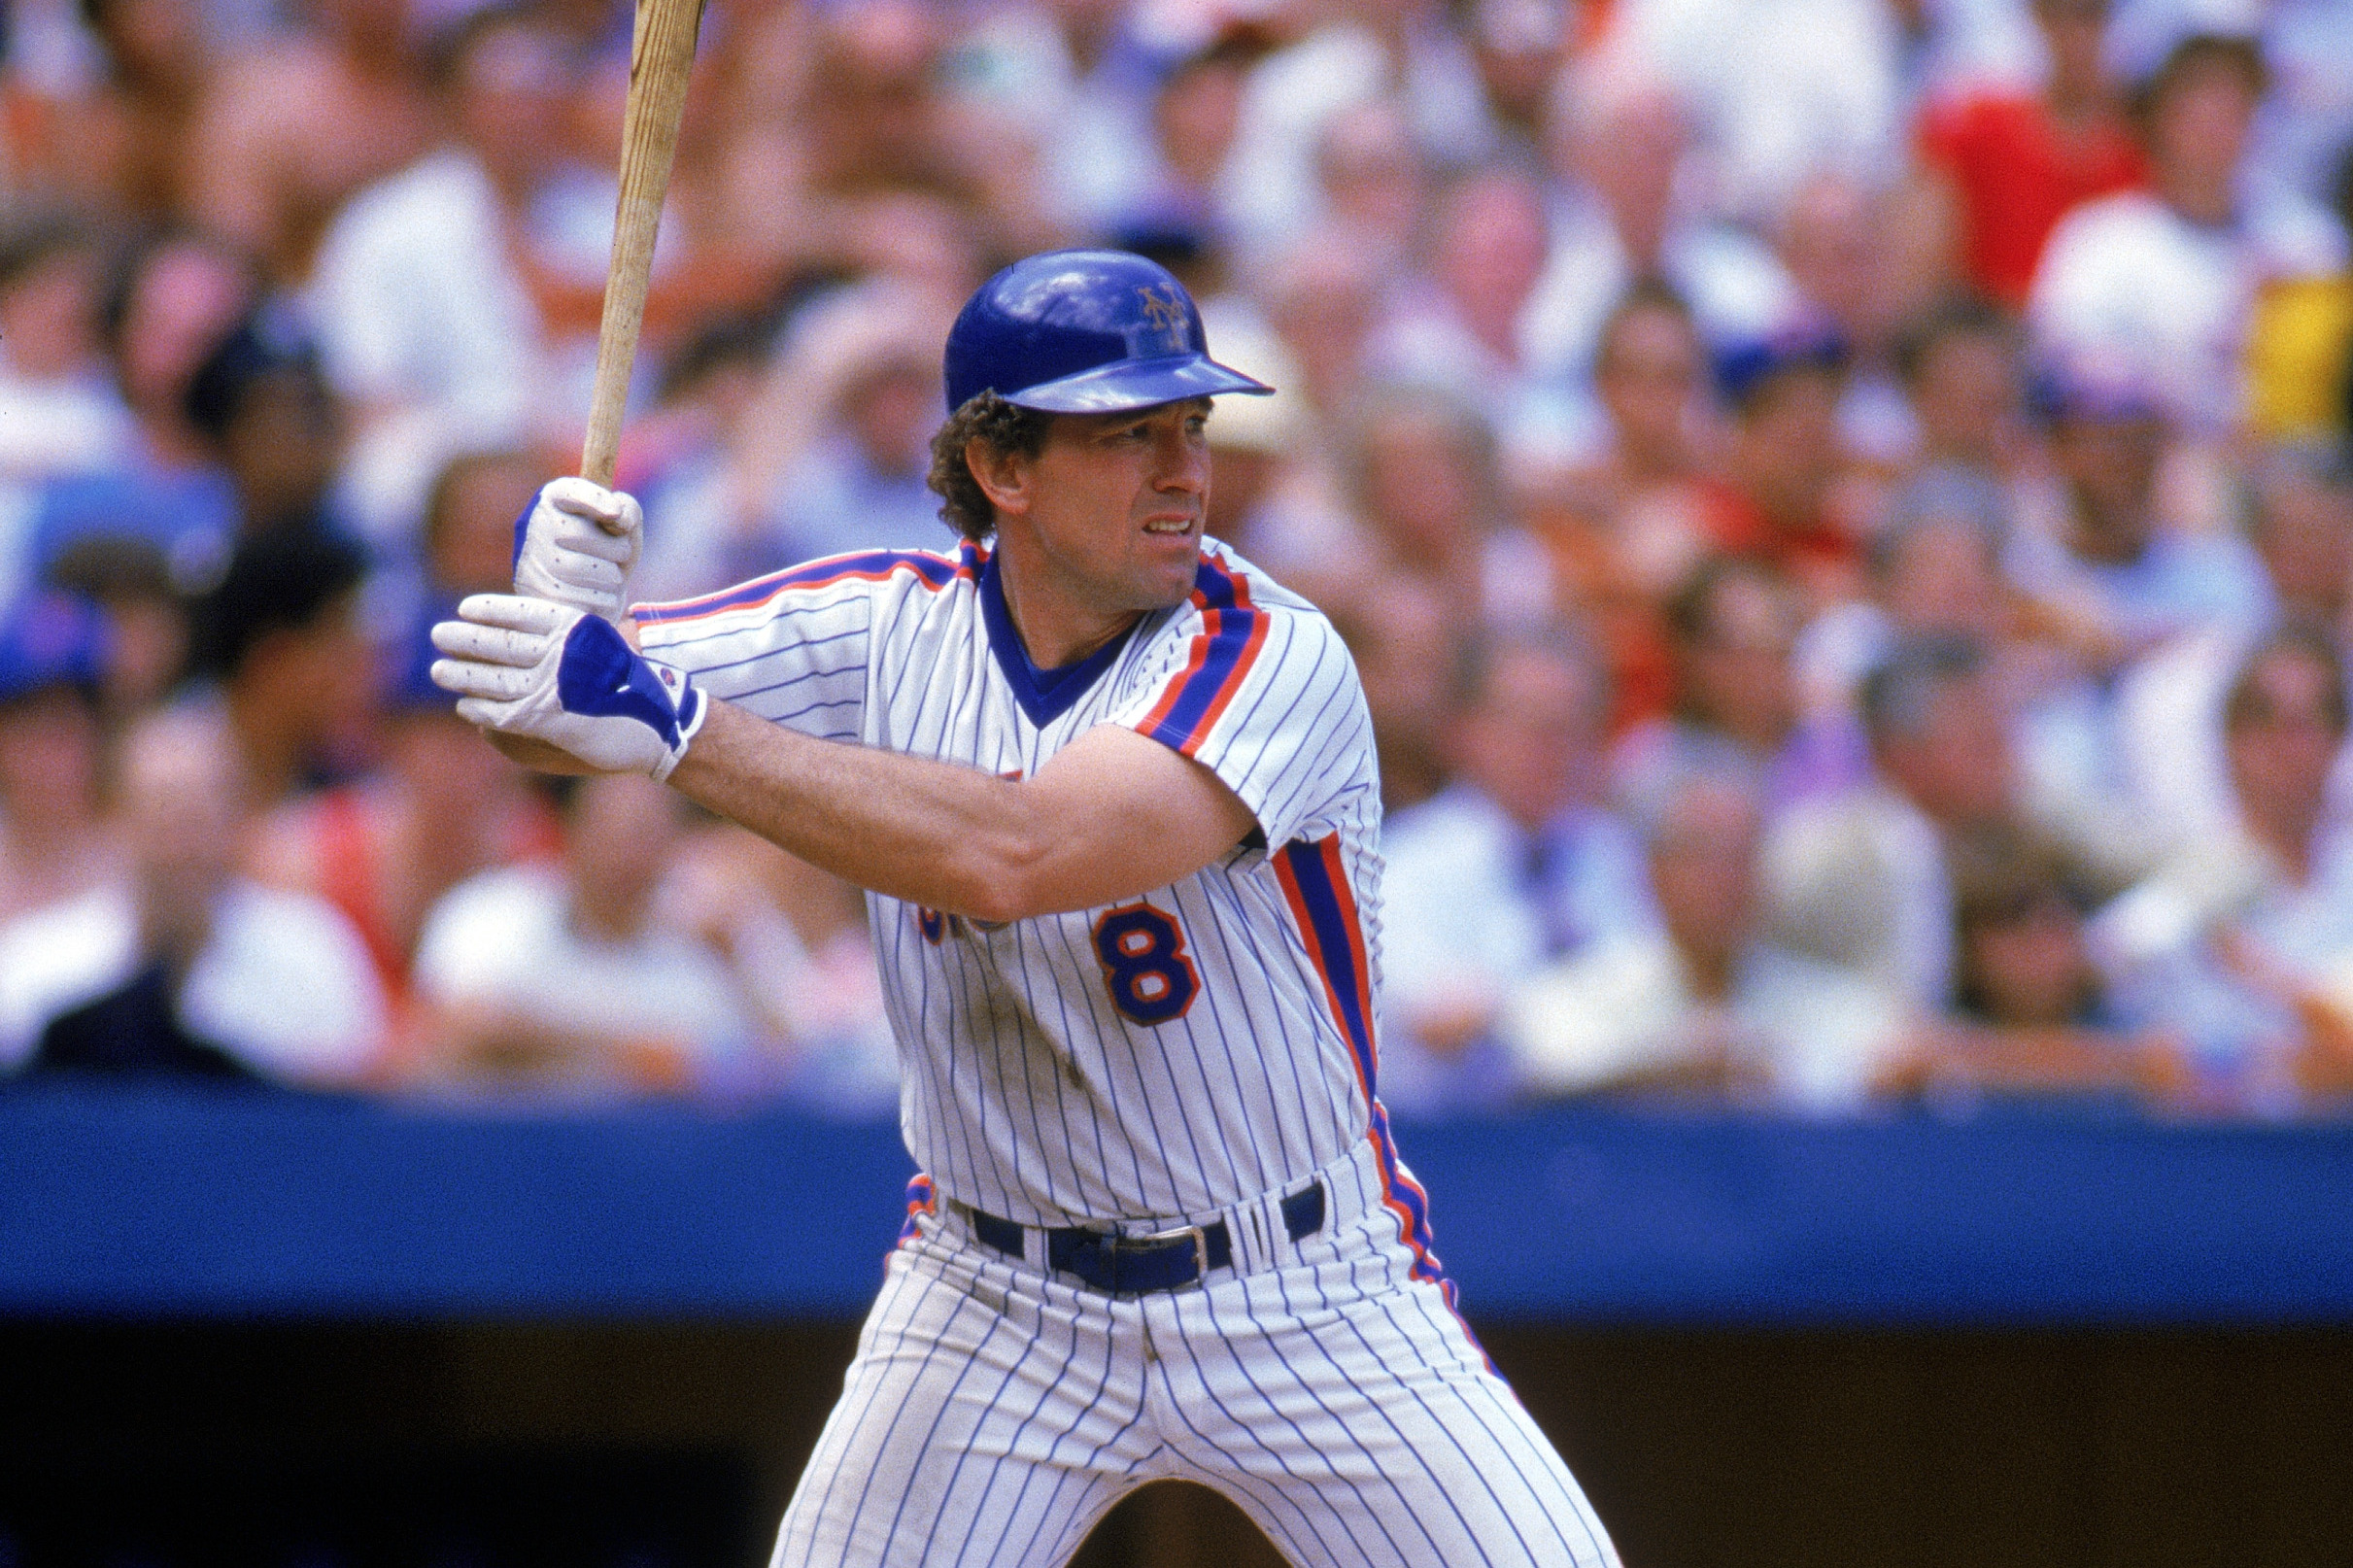 Gary Carter was larger-than-life star for Mets who loved the game 